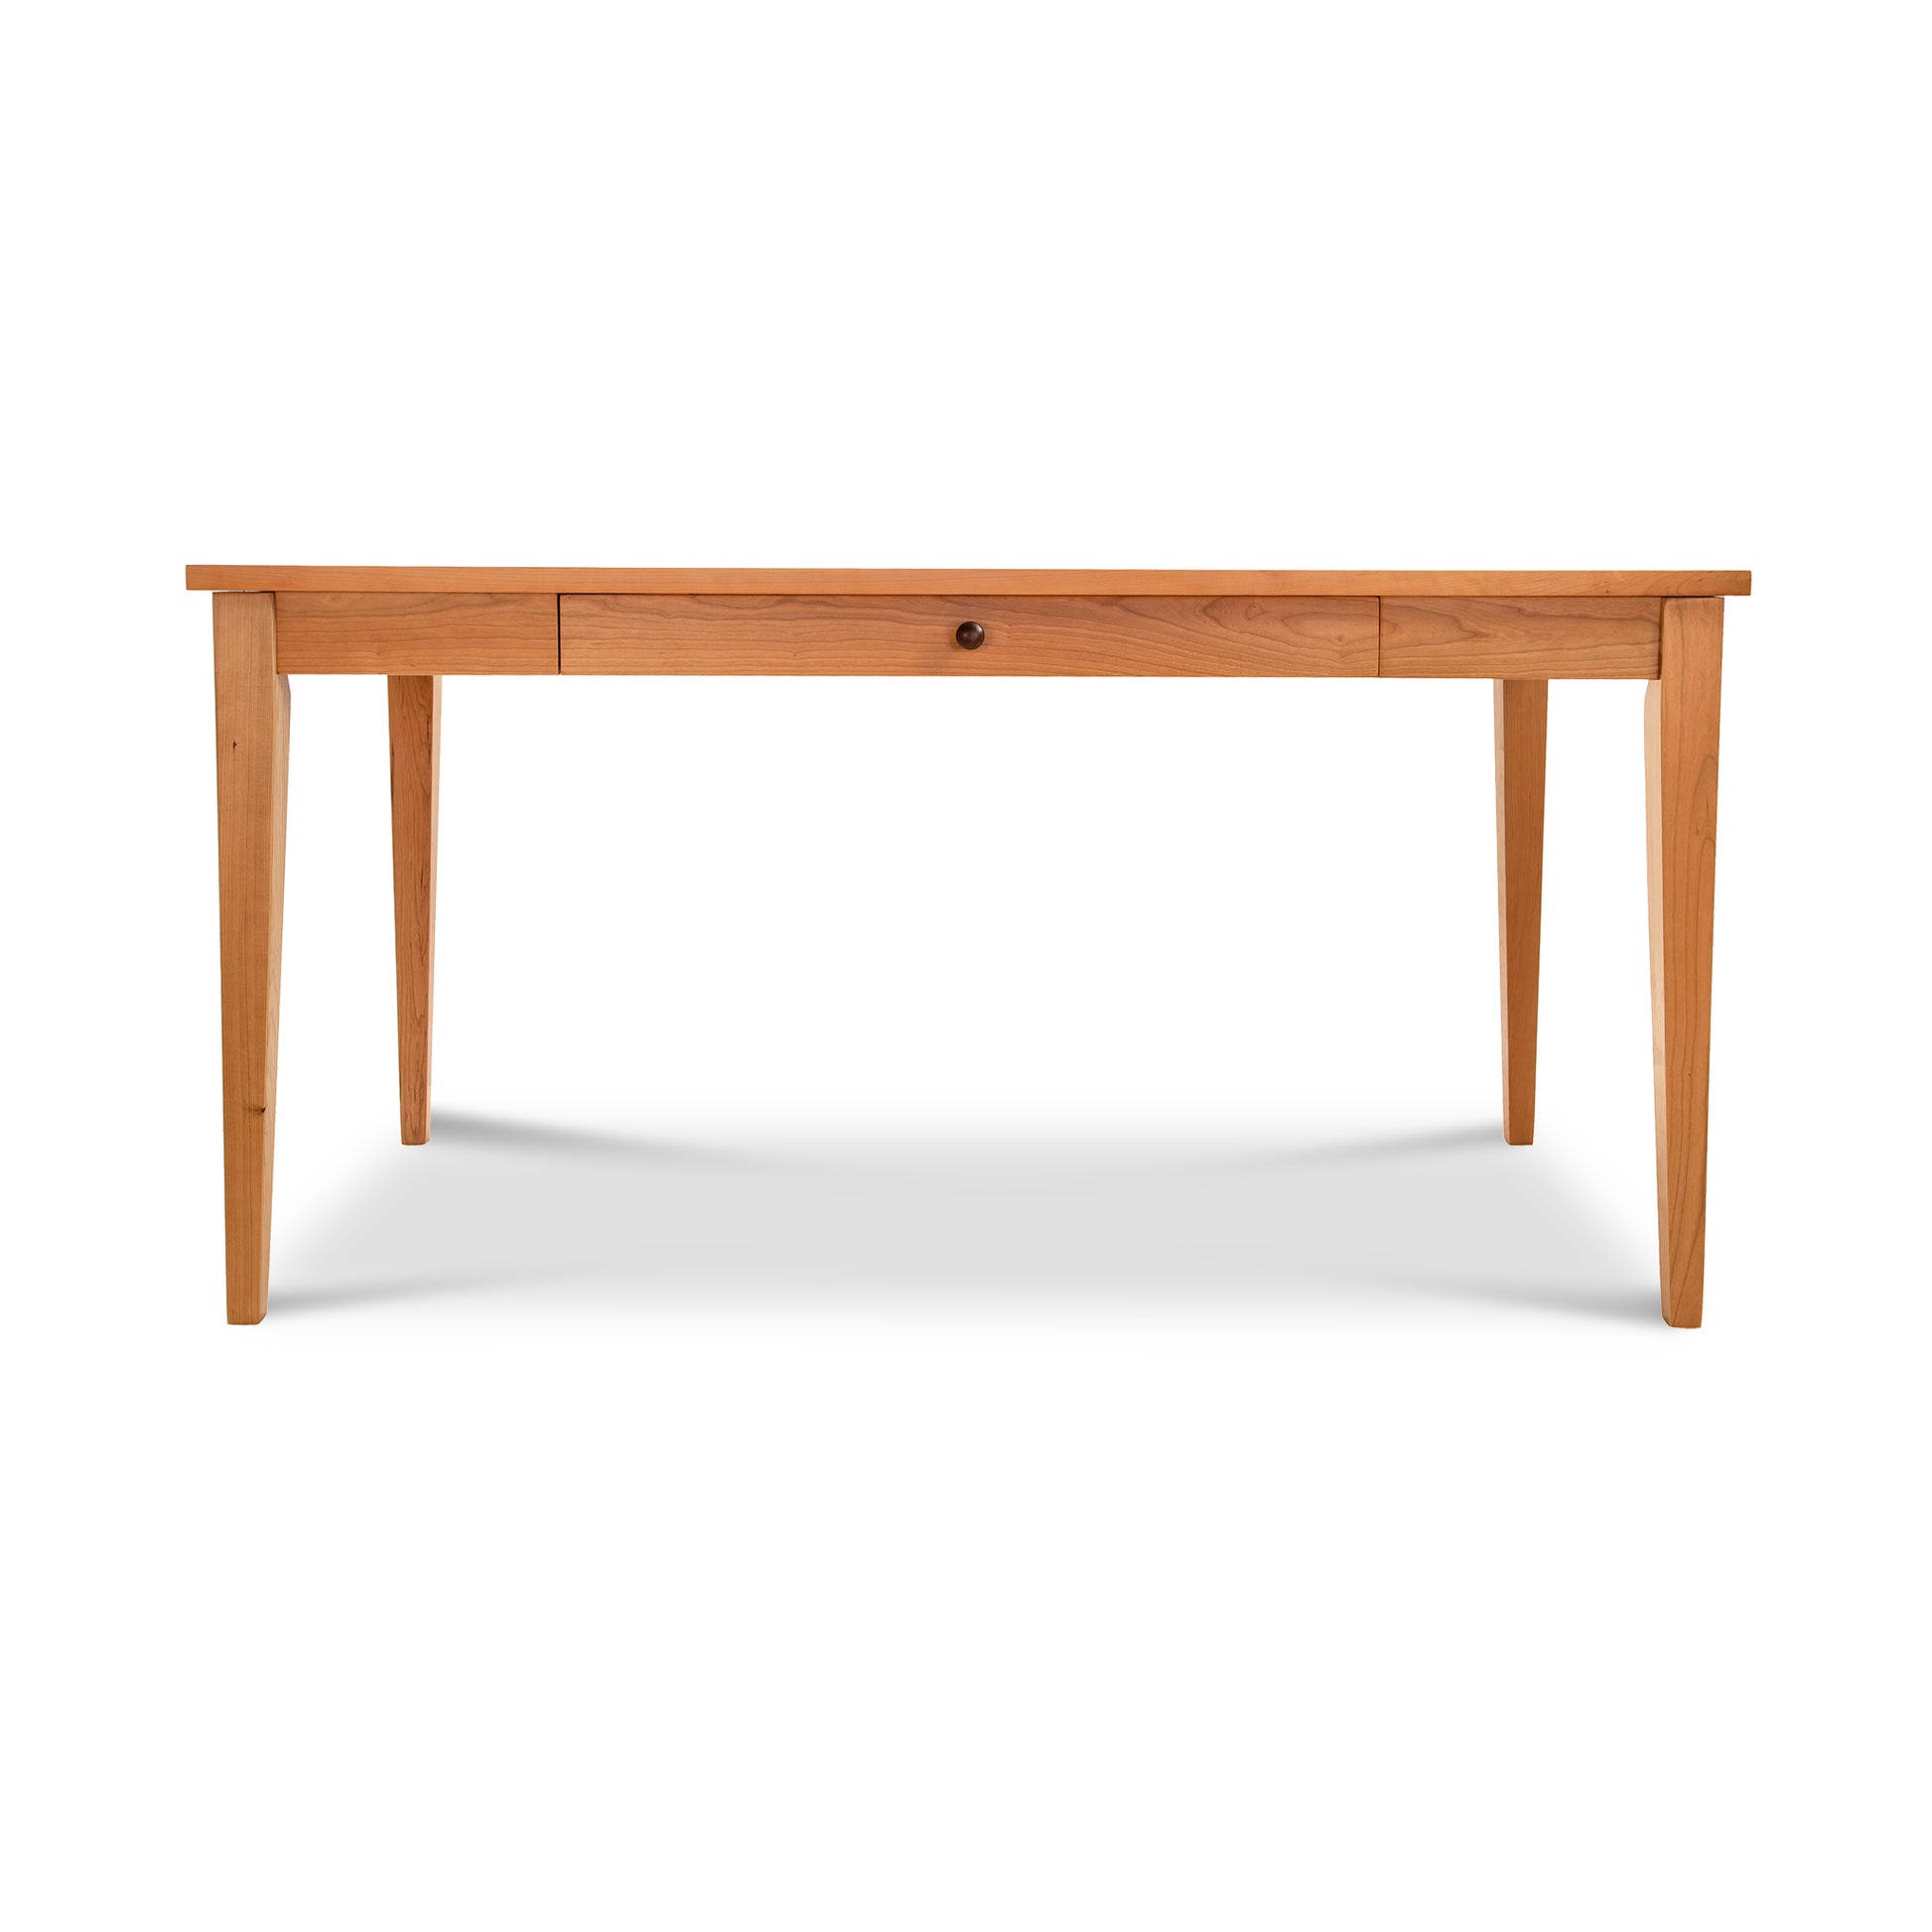 A simple eco-friendly Lyndon Furniture Classic Shaker Writing Desk with a smooth surface and slender legs, featuring two shallow drawers, each with a round black knob, set against a plain white background.